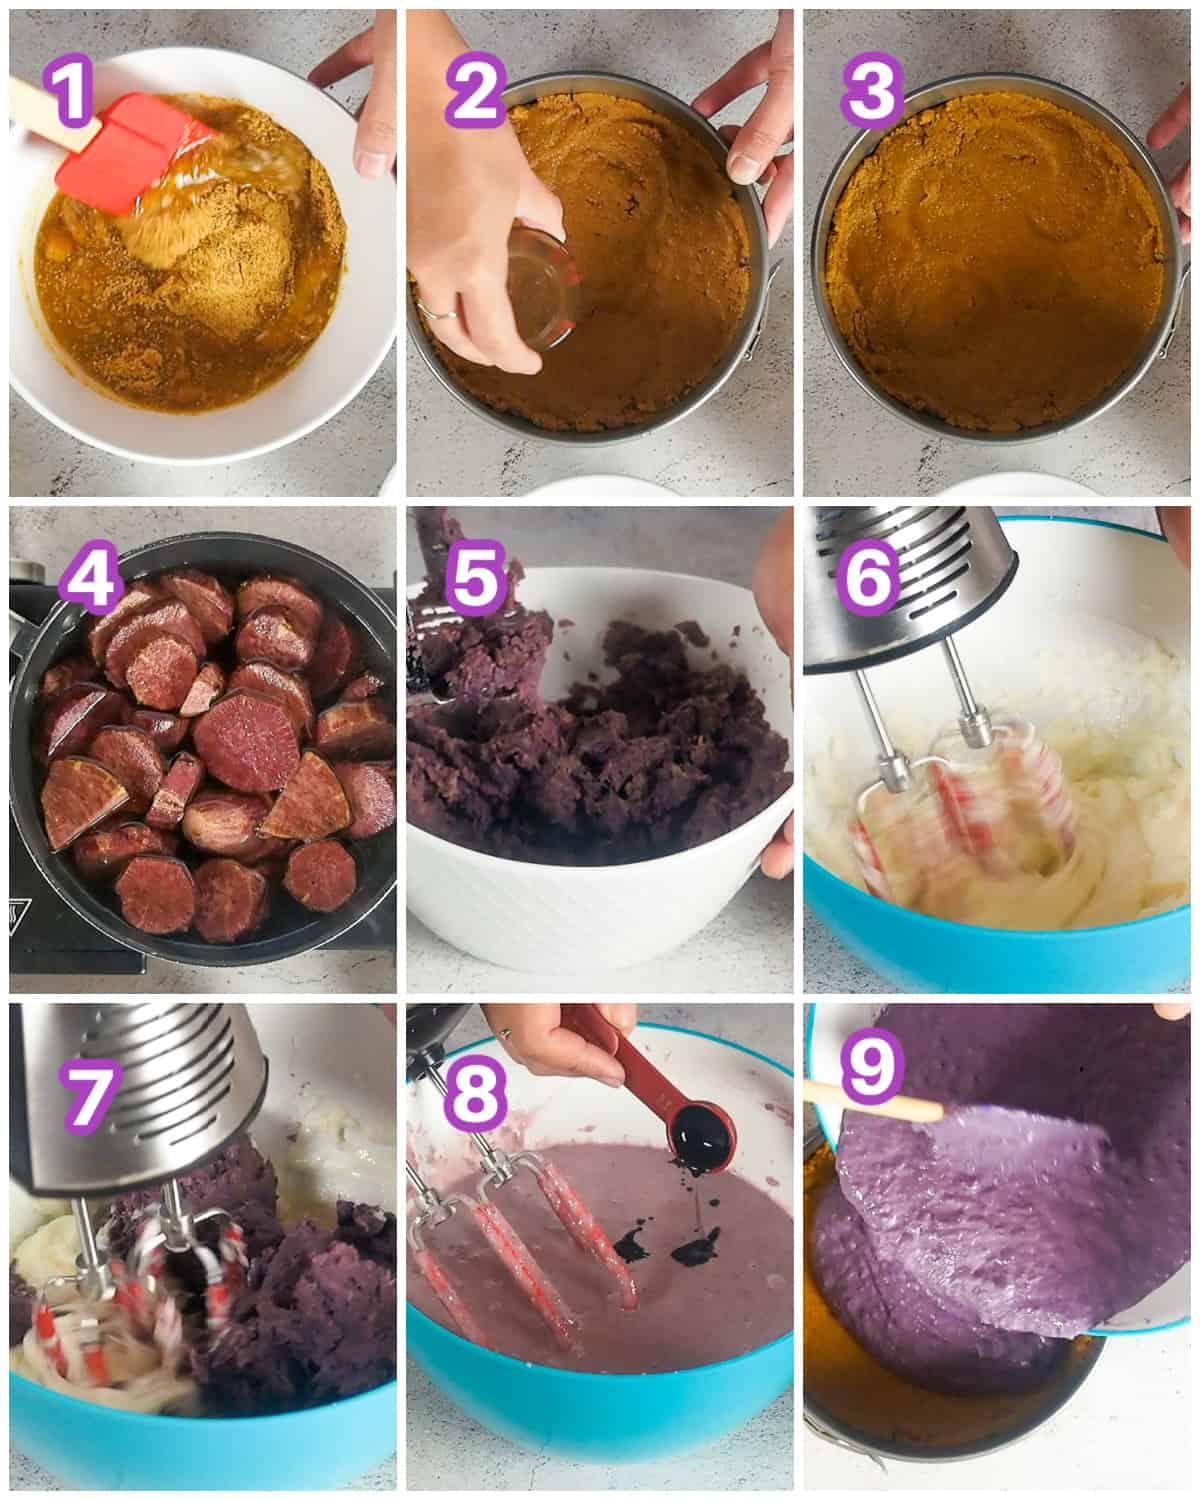 The step by step process of making ube cheesecake.